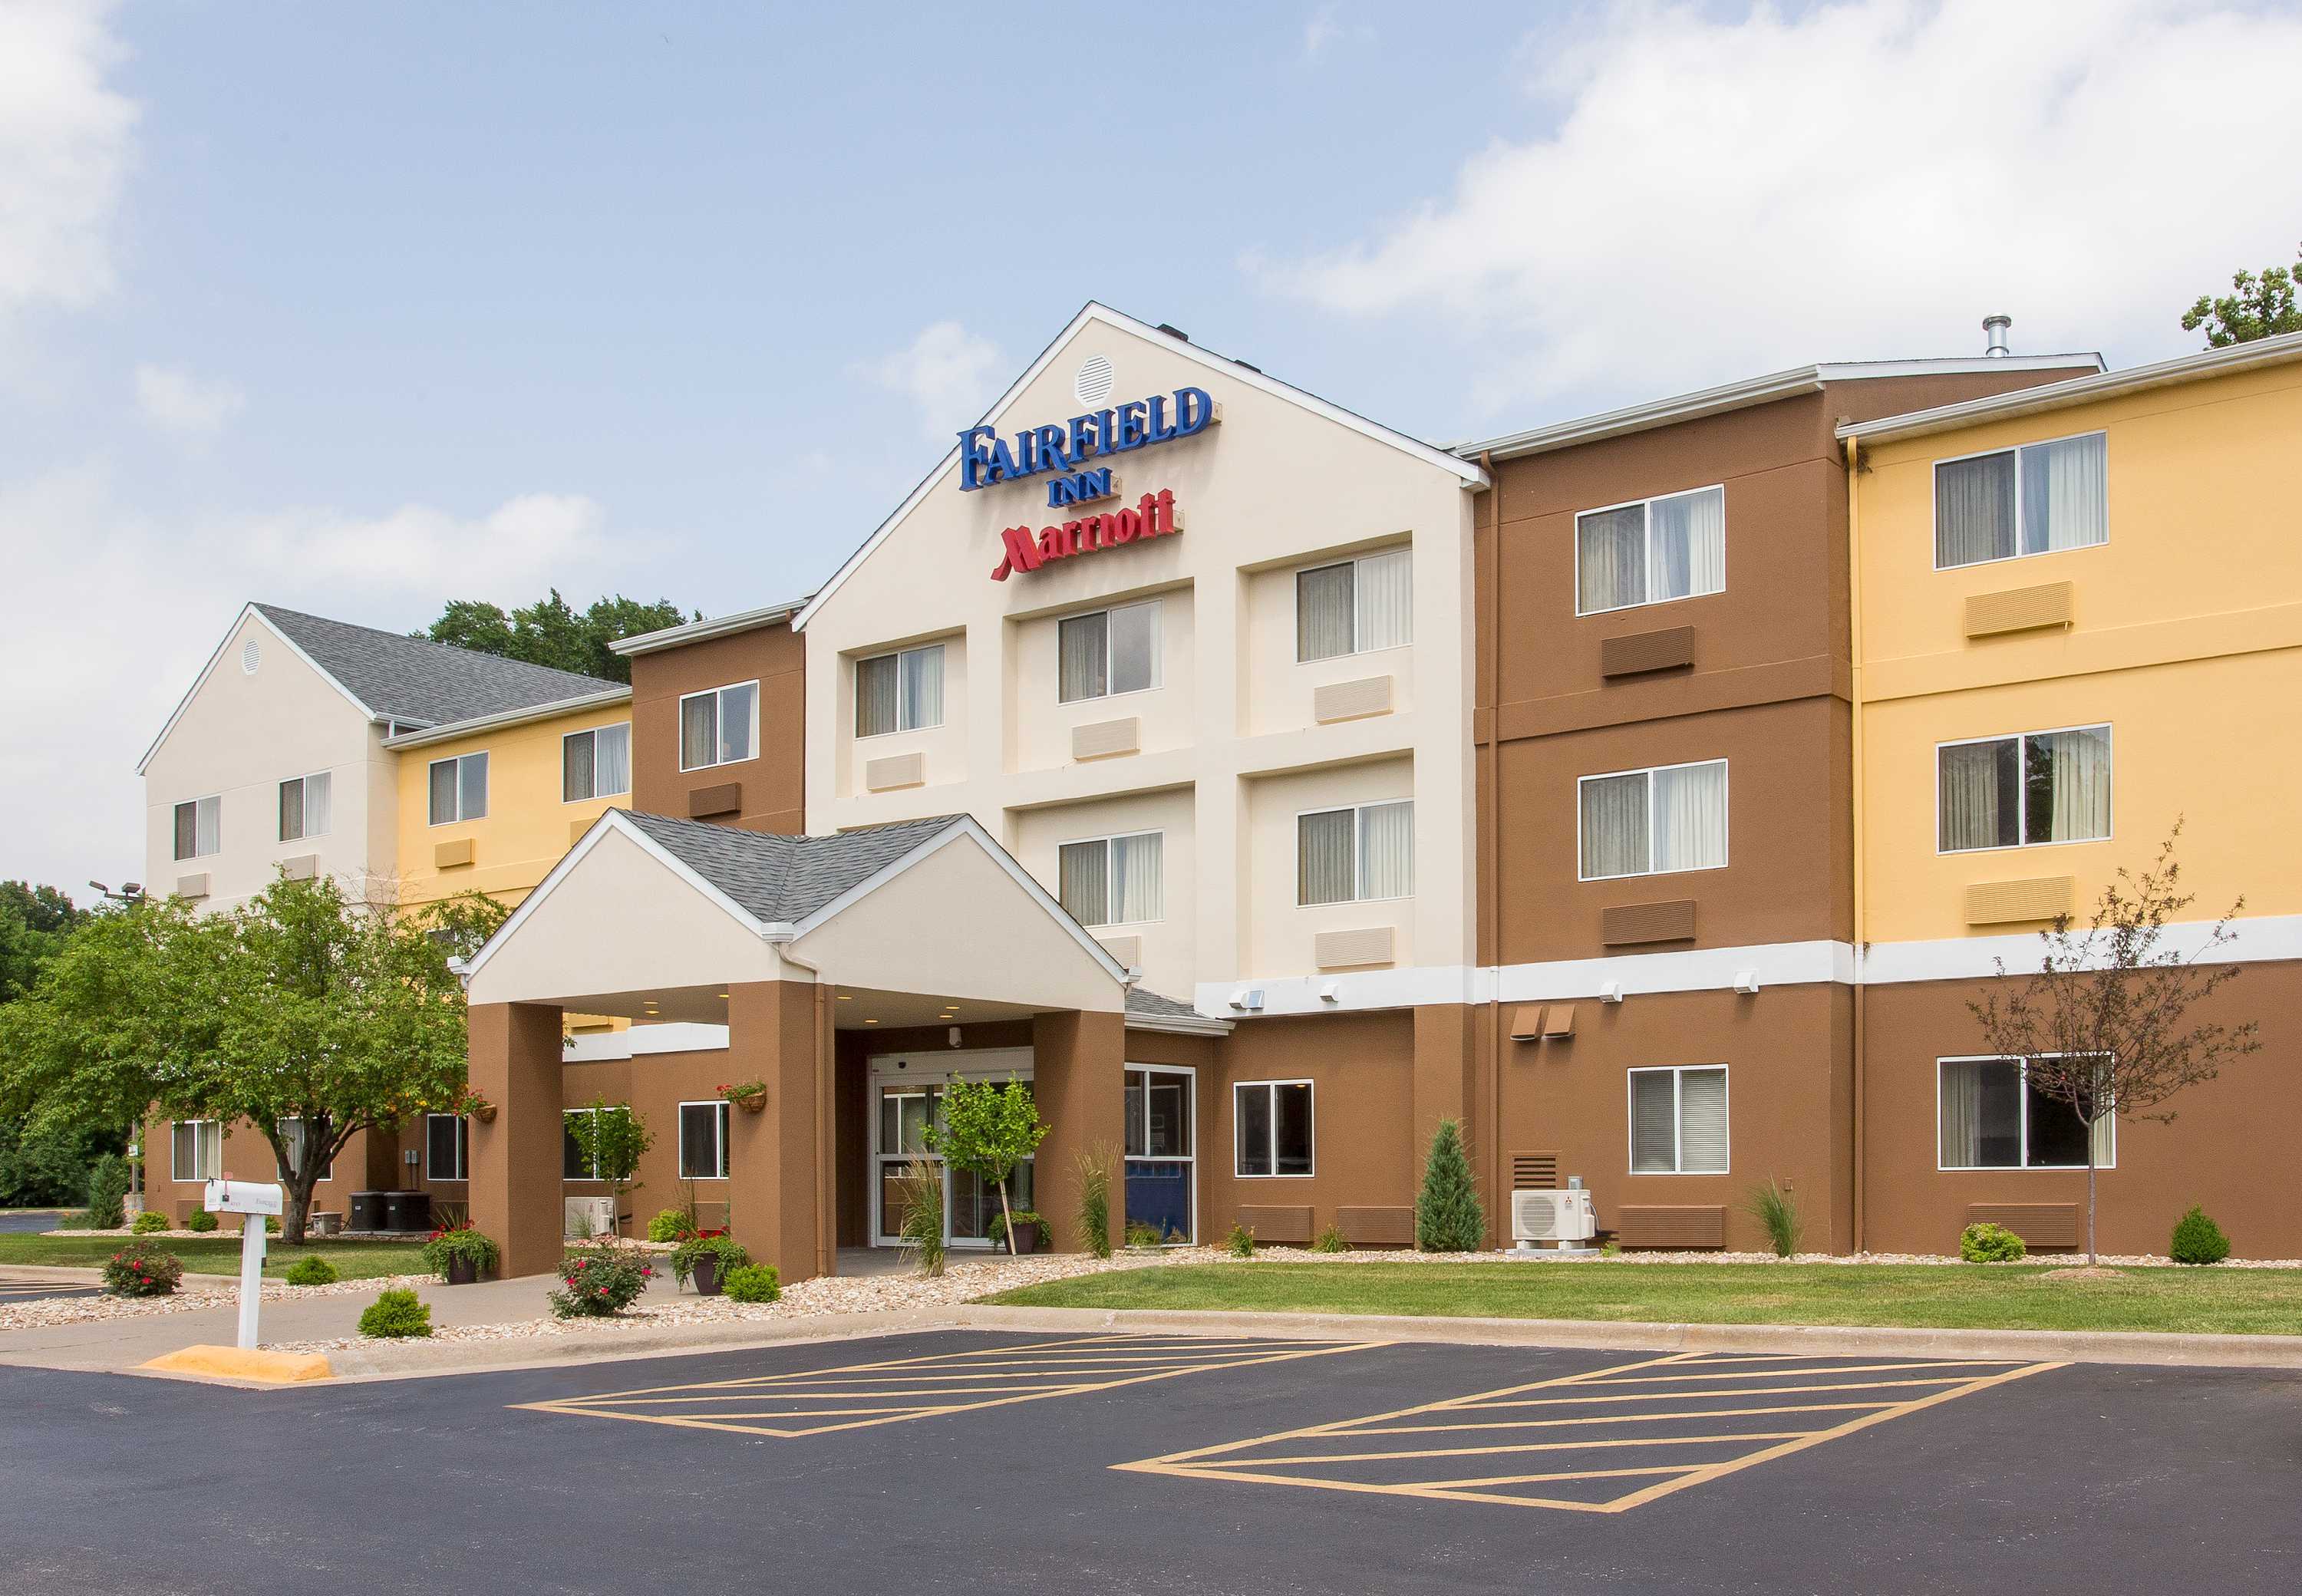 Photo of Fairfield Inn & Suites by Marriott Quincy, Quincy, IL